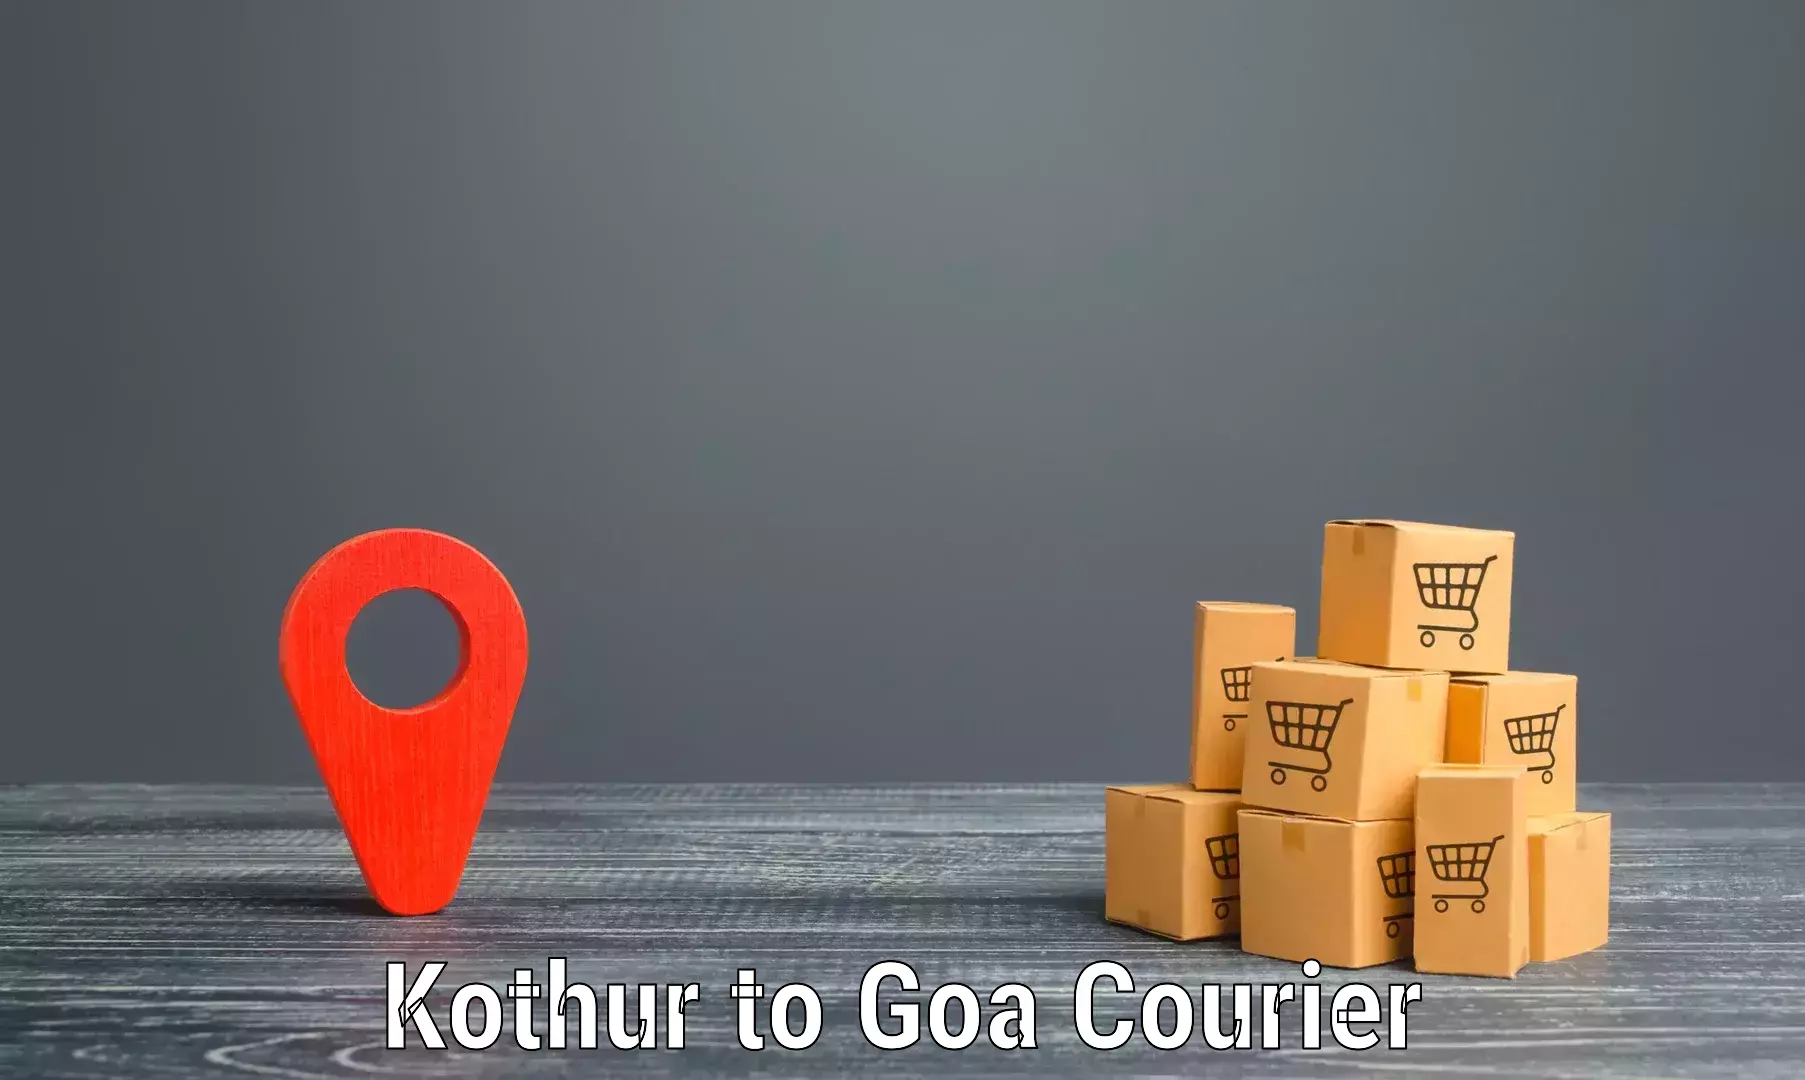 Automated parcel services Kothur to Panaji